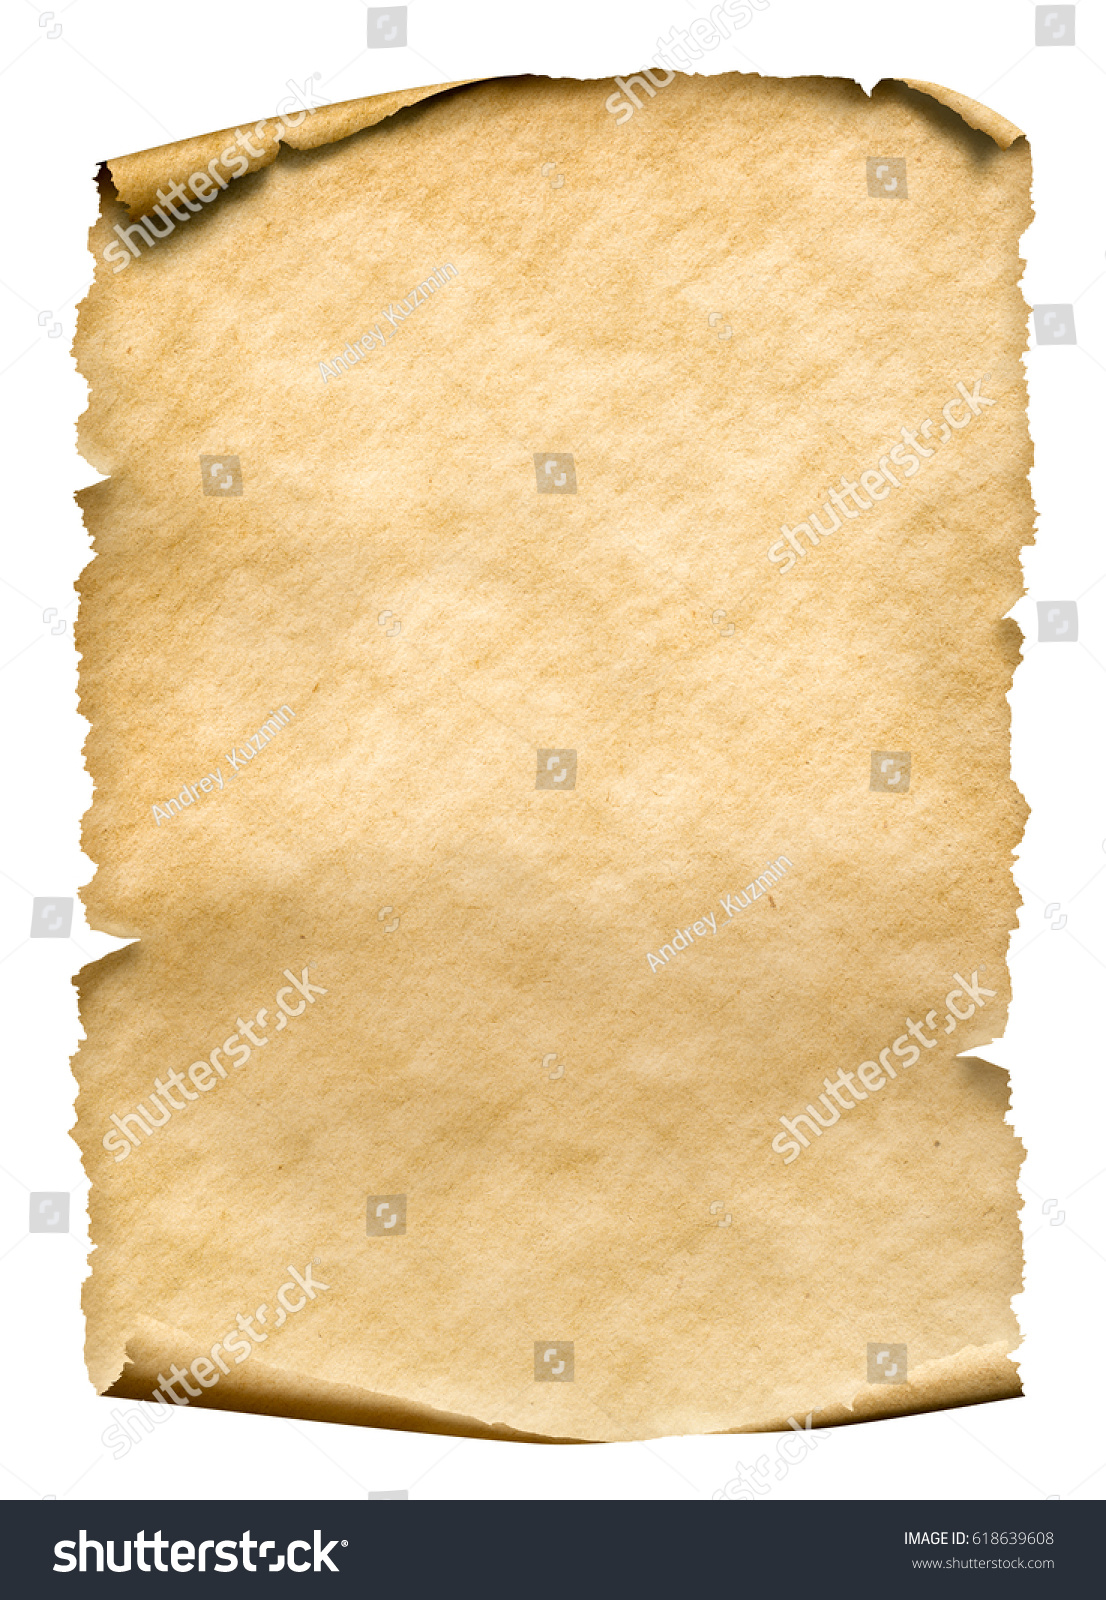 Old paper manusript or parchment vertically oriented #618639608